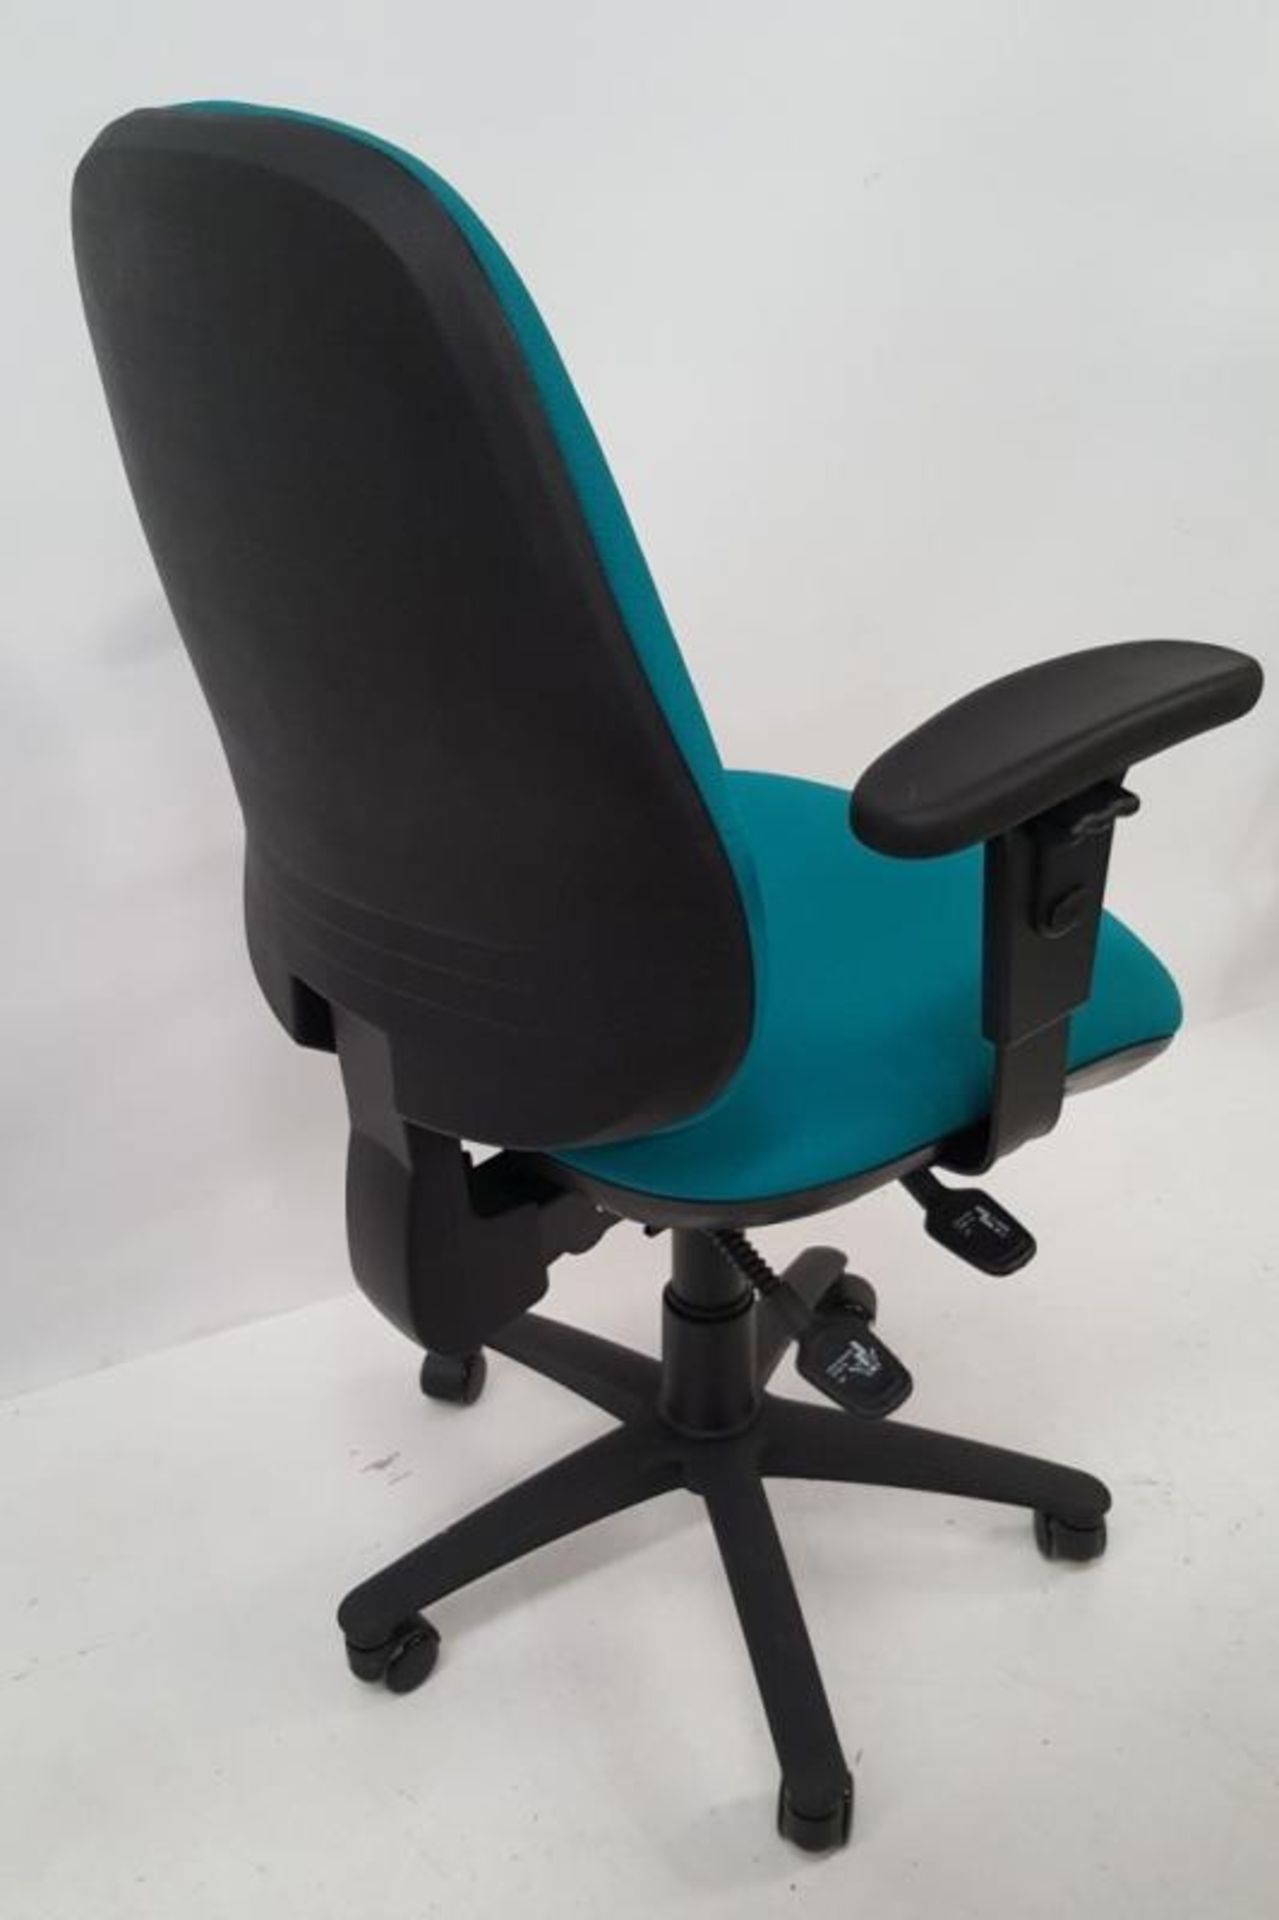 4 x OCEE Design ‘TICK’ Premium High Back Office Chairs In Turquoise With Adjustable Height And Synch - Bild 8 aus 9